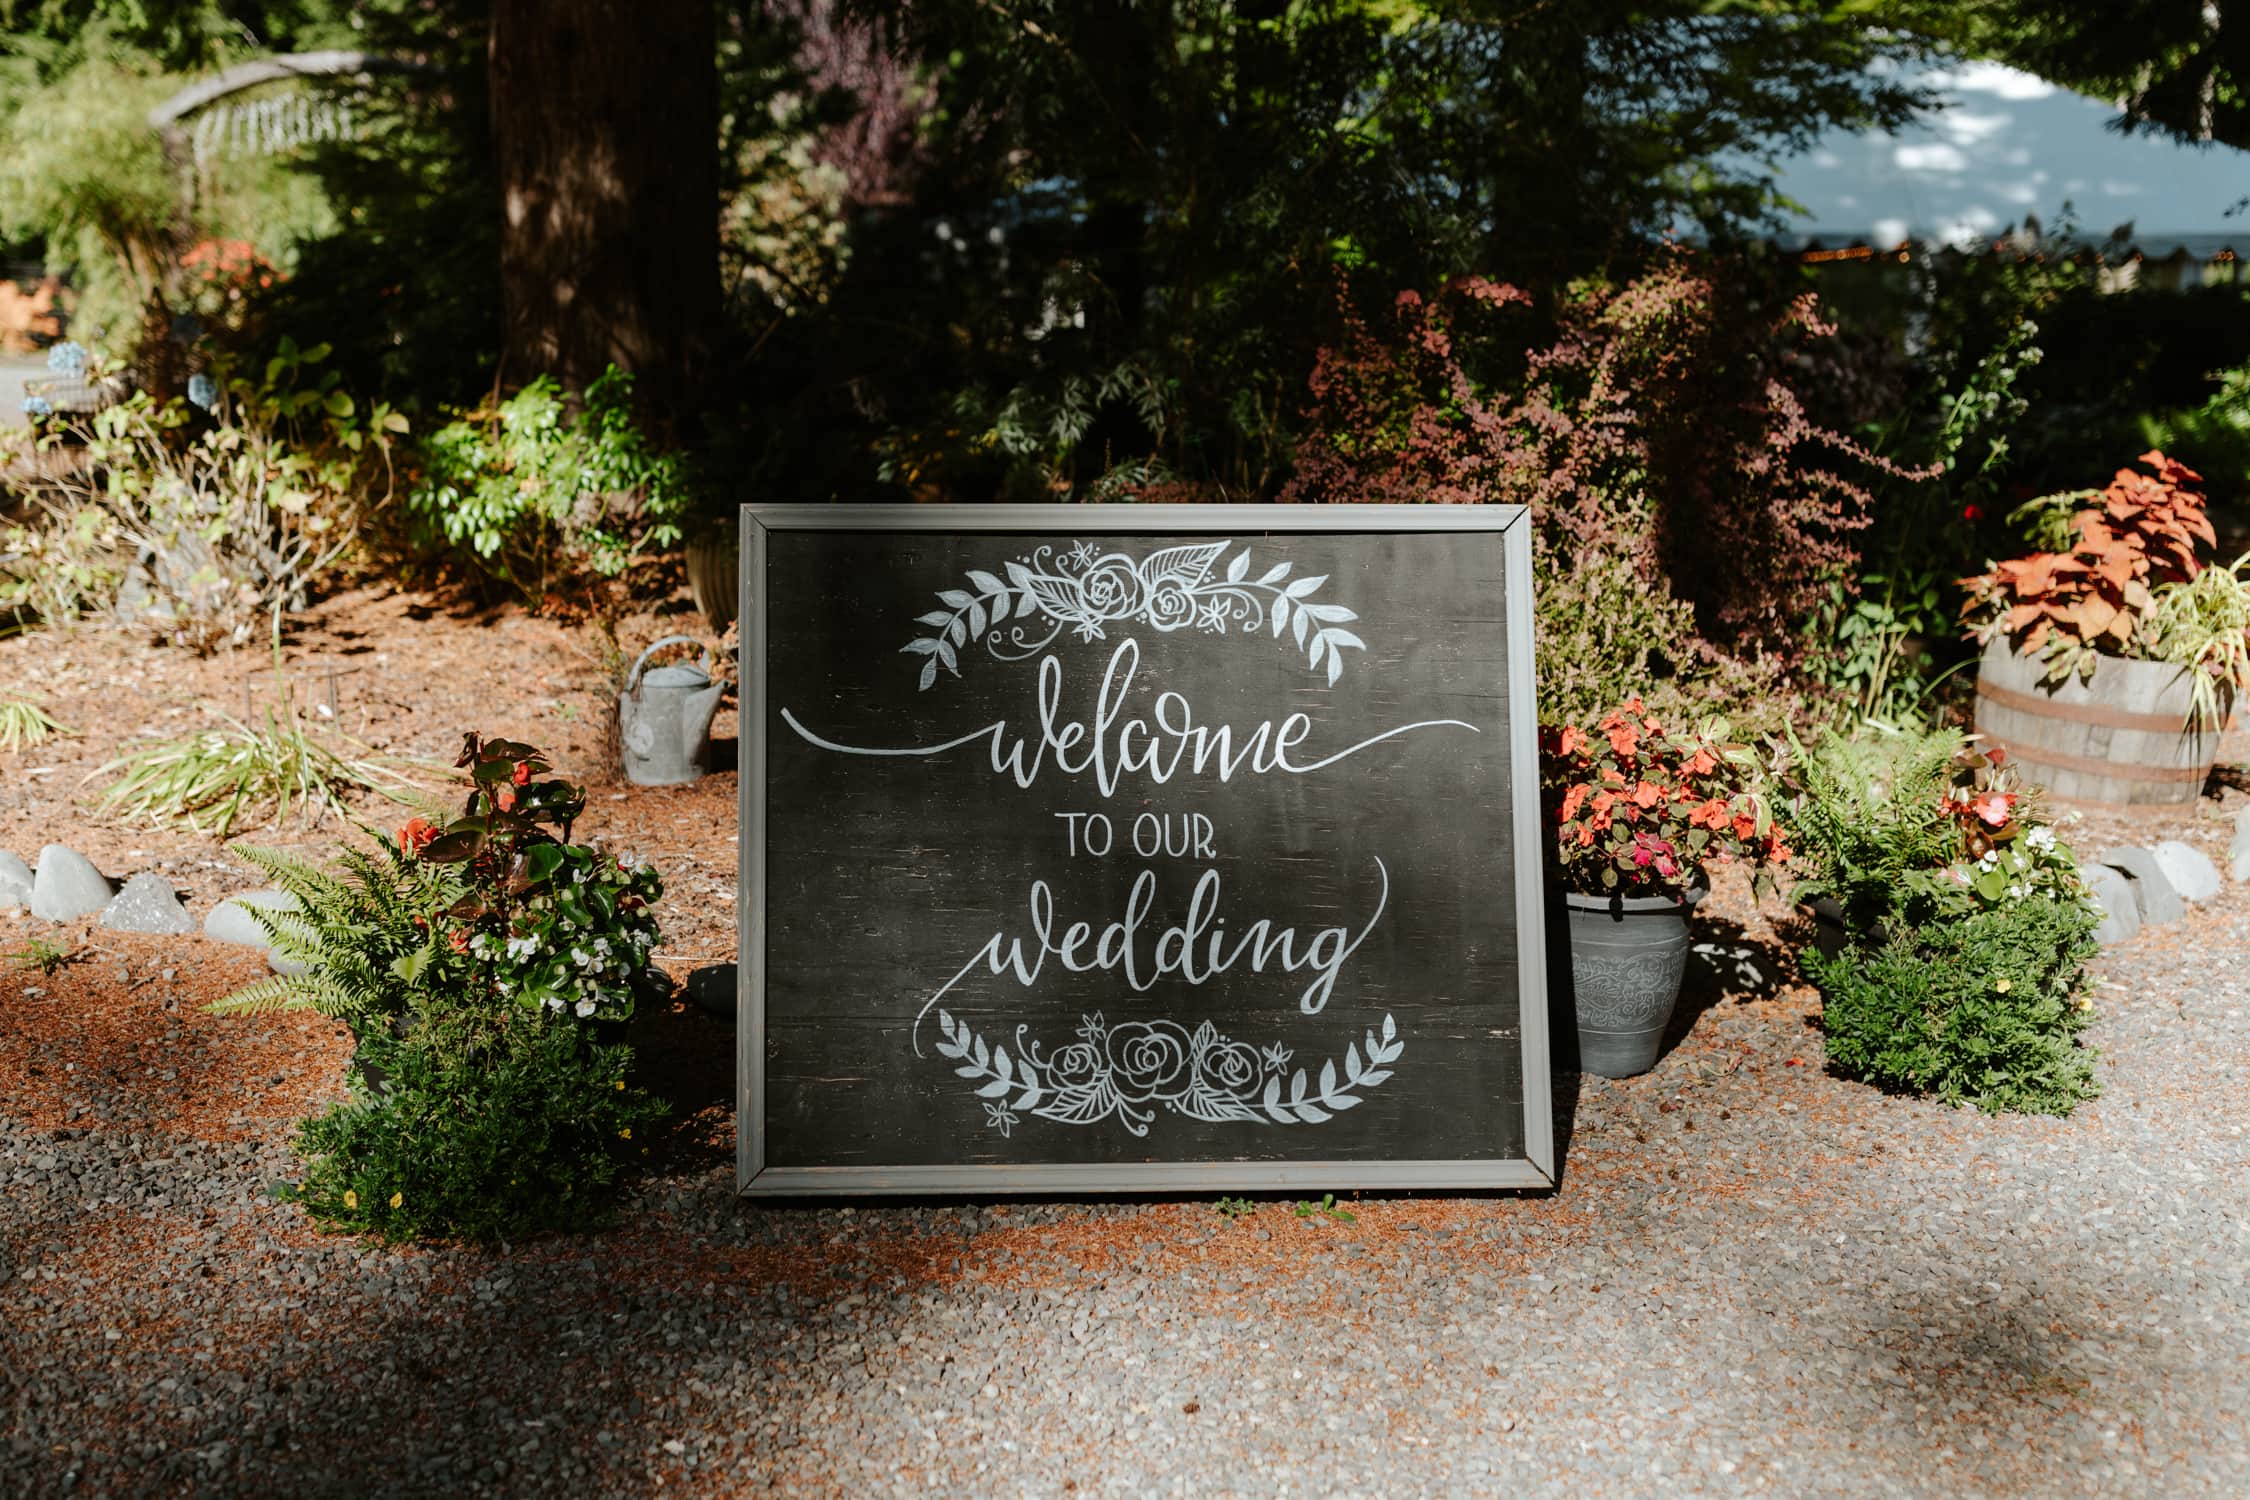 A sign that reads "welcome to our wedding" at Fern Acres in Forks, Washington.